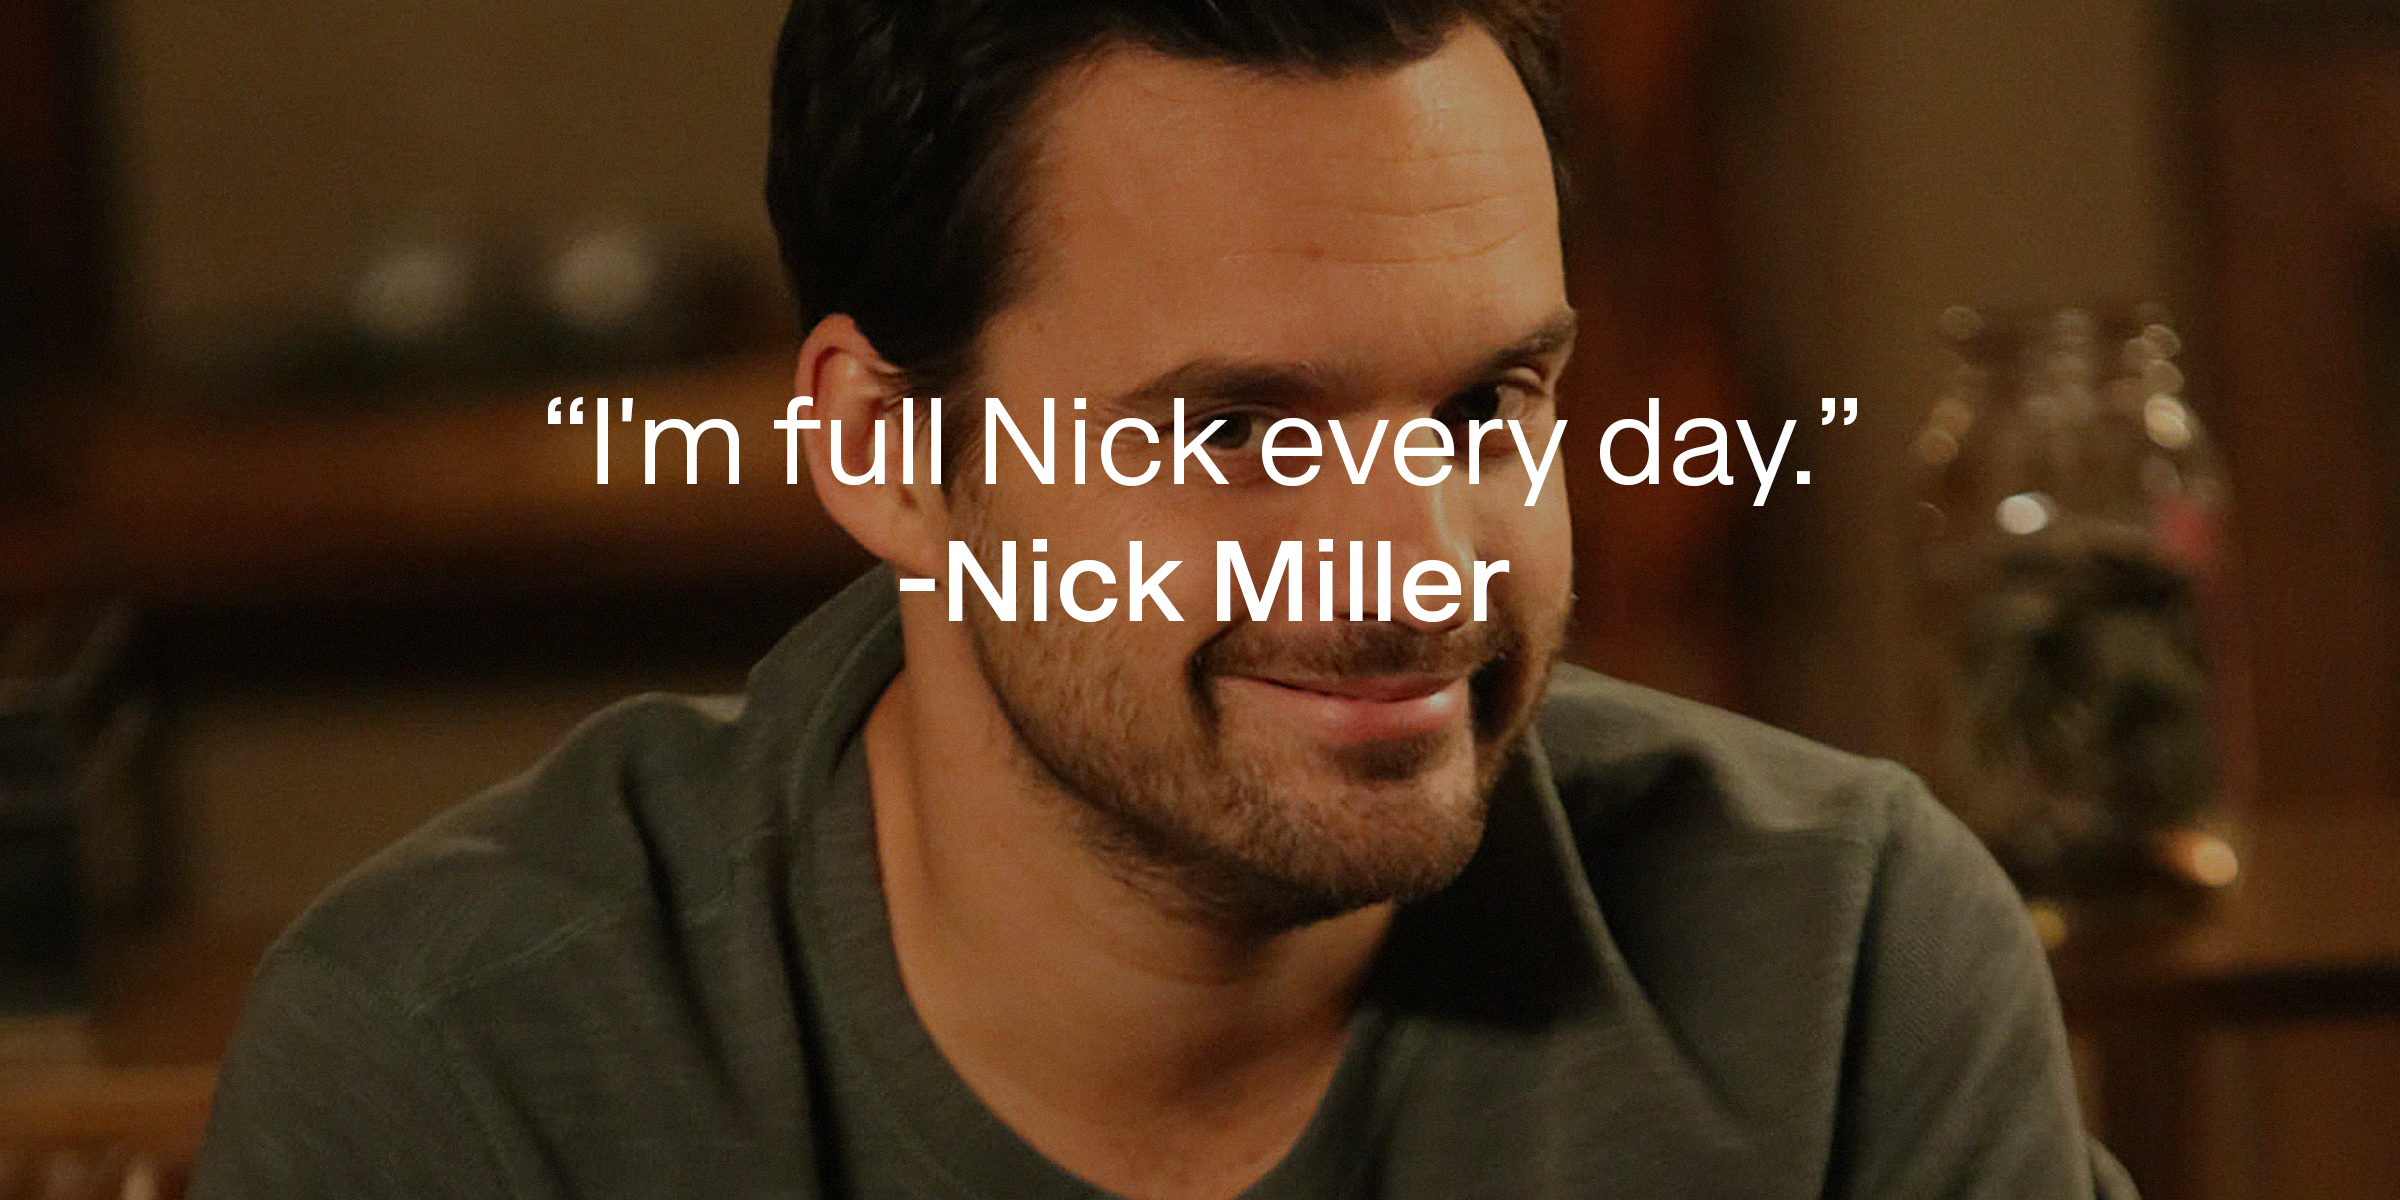 Nick Miller, with his quote: “I’m full Nick every day.” | Source: facebook.com/OfficialNewGirl